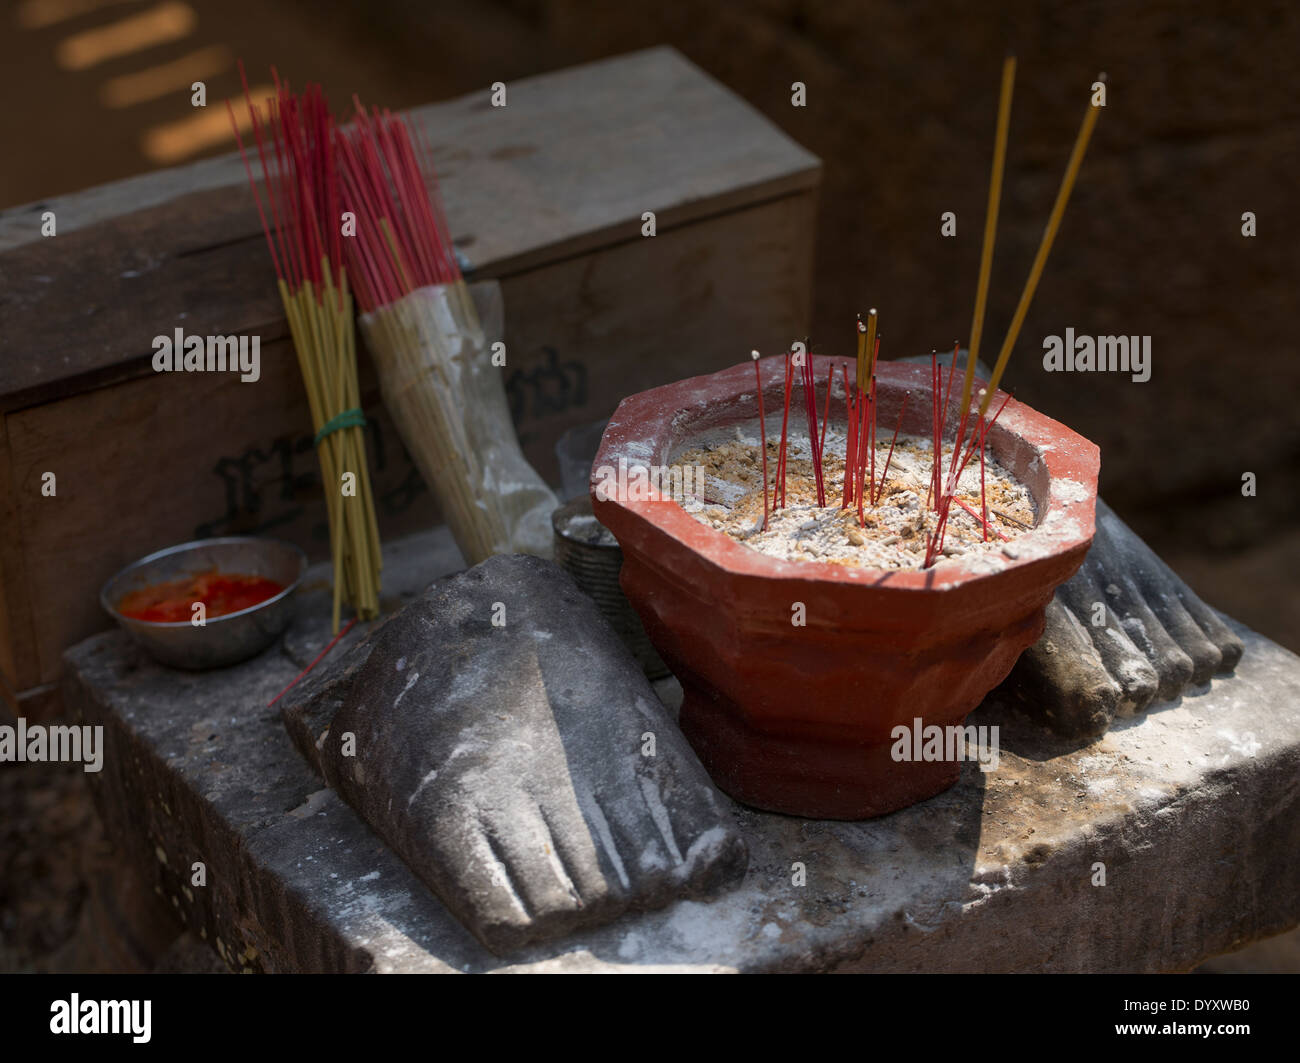 Offering of incense. Banteay Samre Temple, Siem Reap, Cambodia Stock Photo